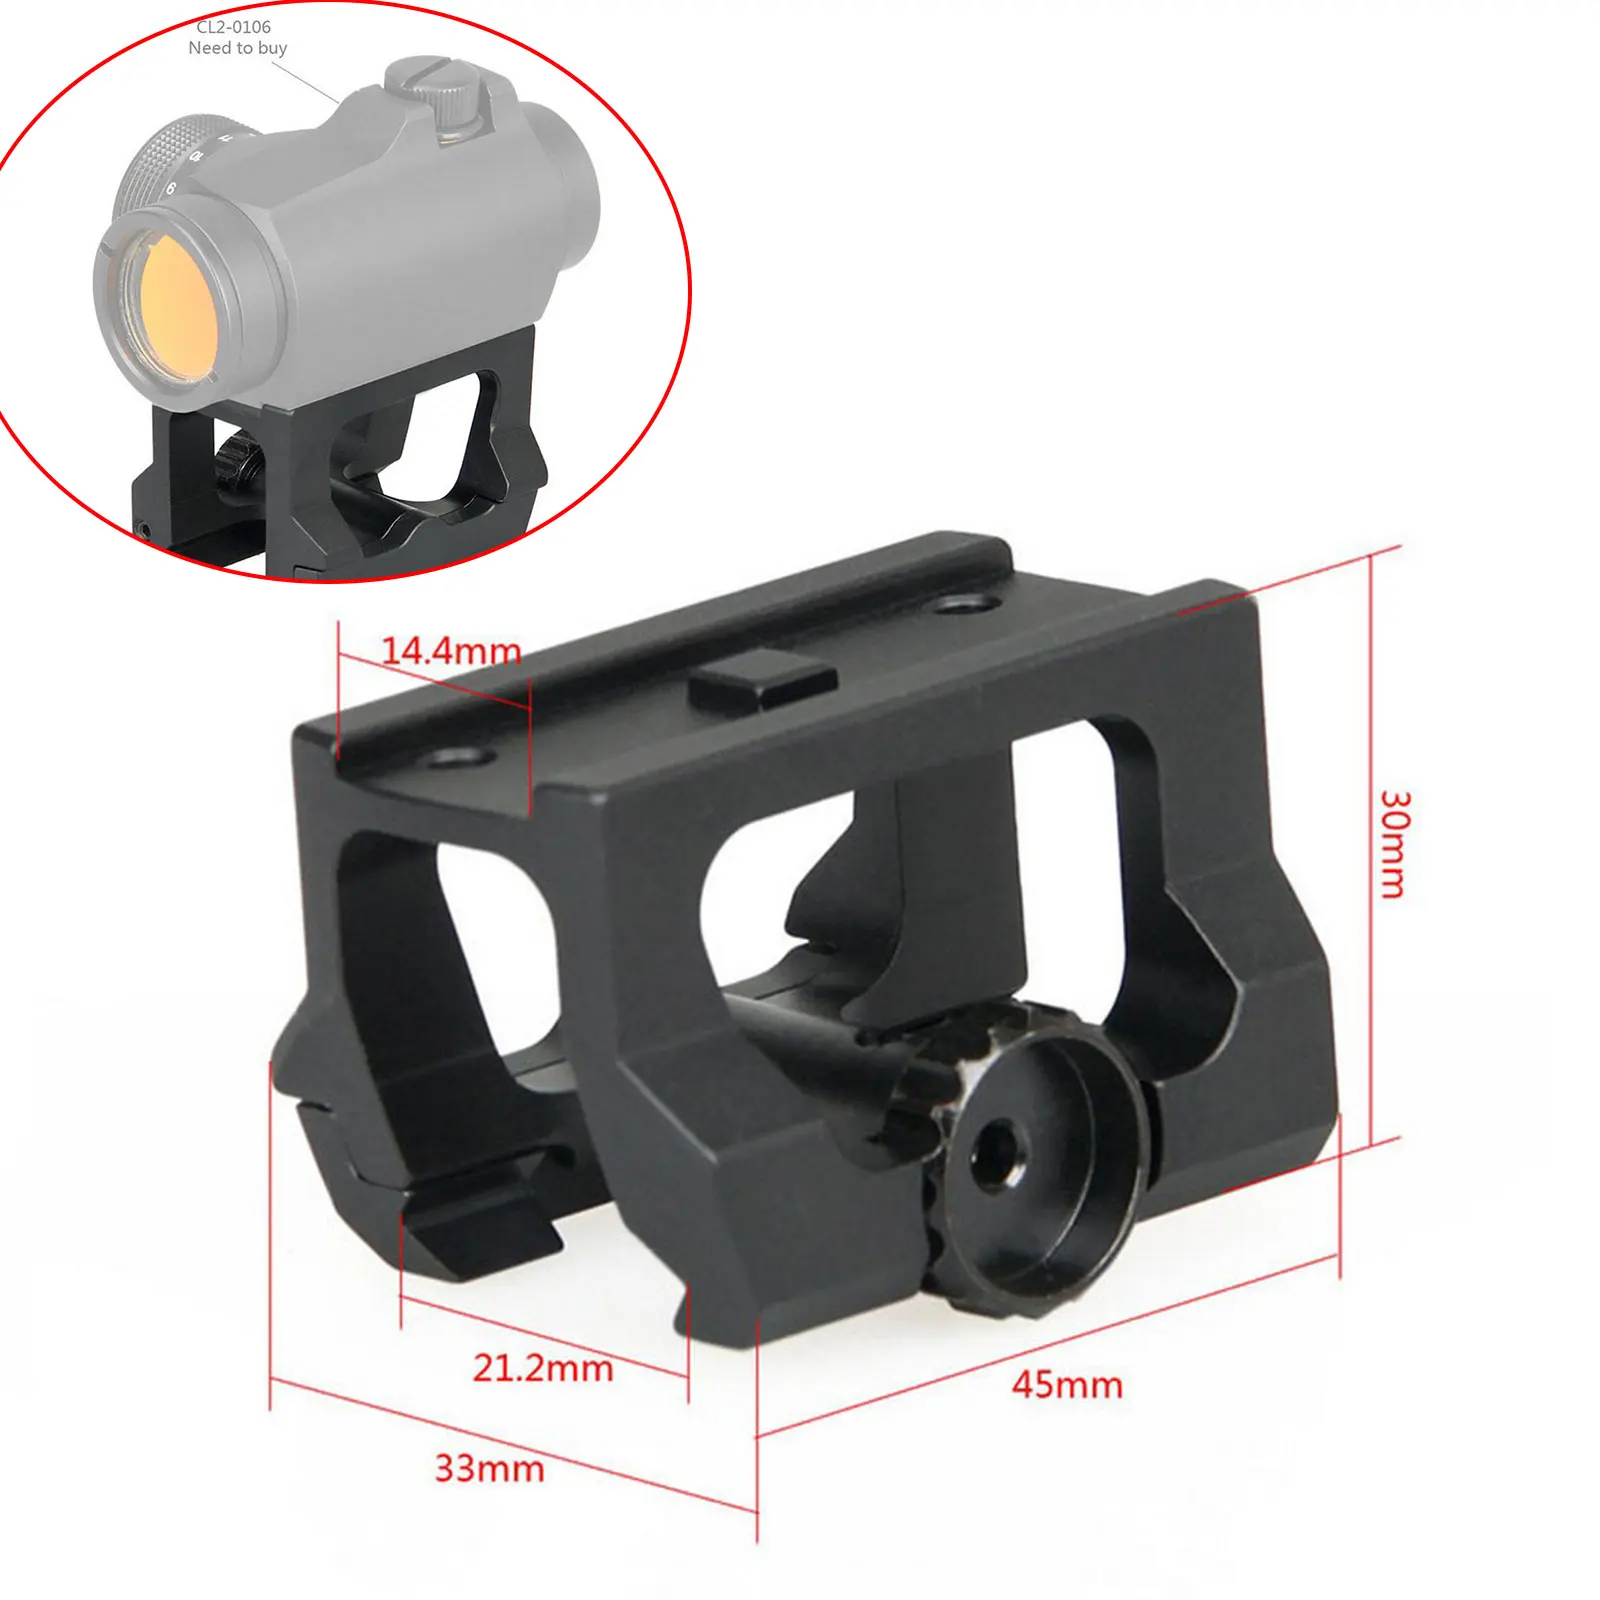 Tactical Riser Seat Mount T2 Red Dot Sight Scope Hunting RifleScope Gun Airsoft Rifle Scope For Picatinny Rail 21.2mm Bracket